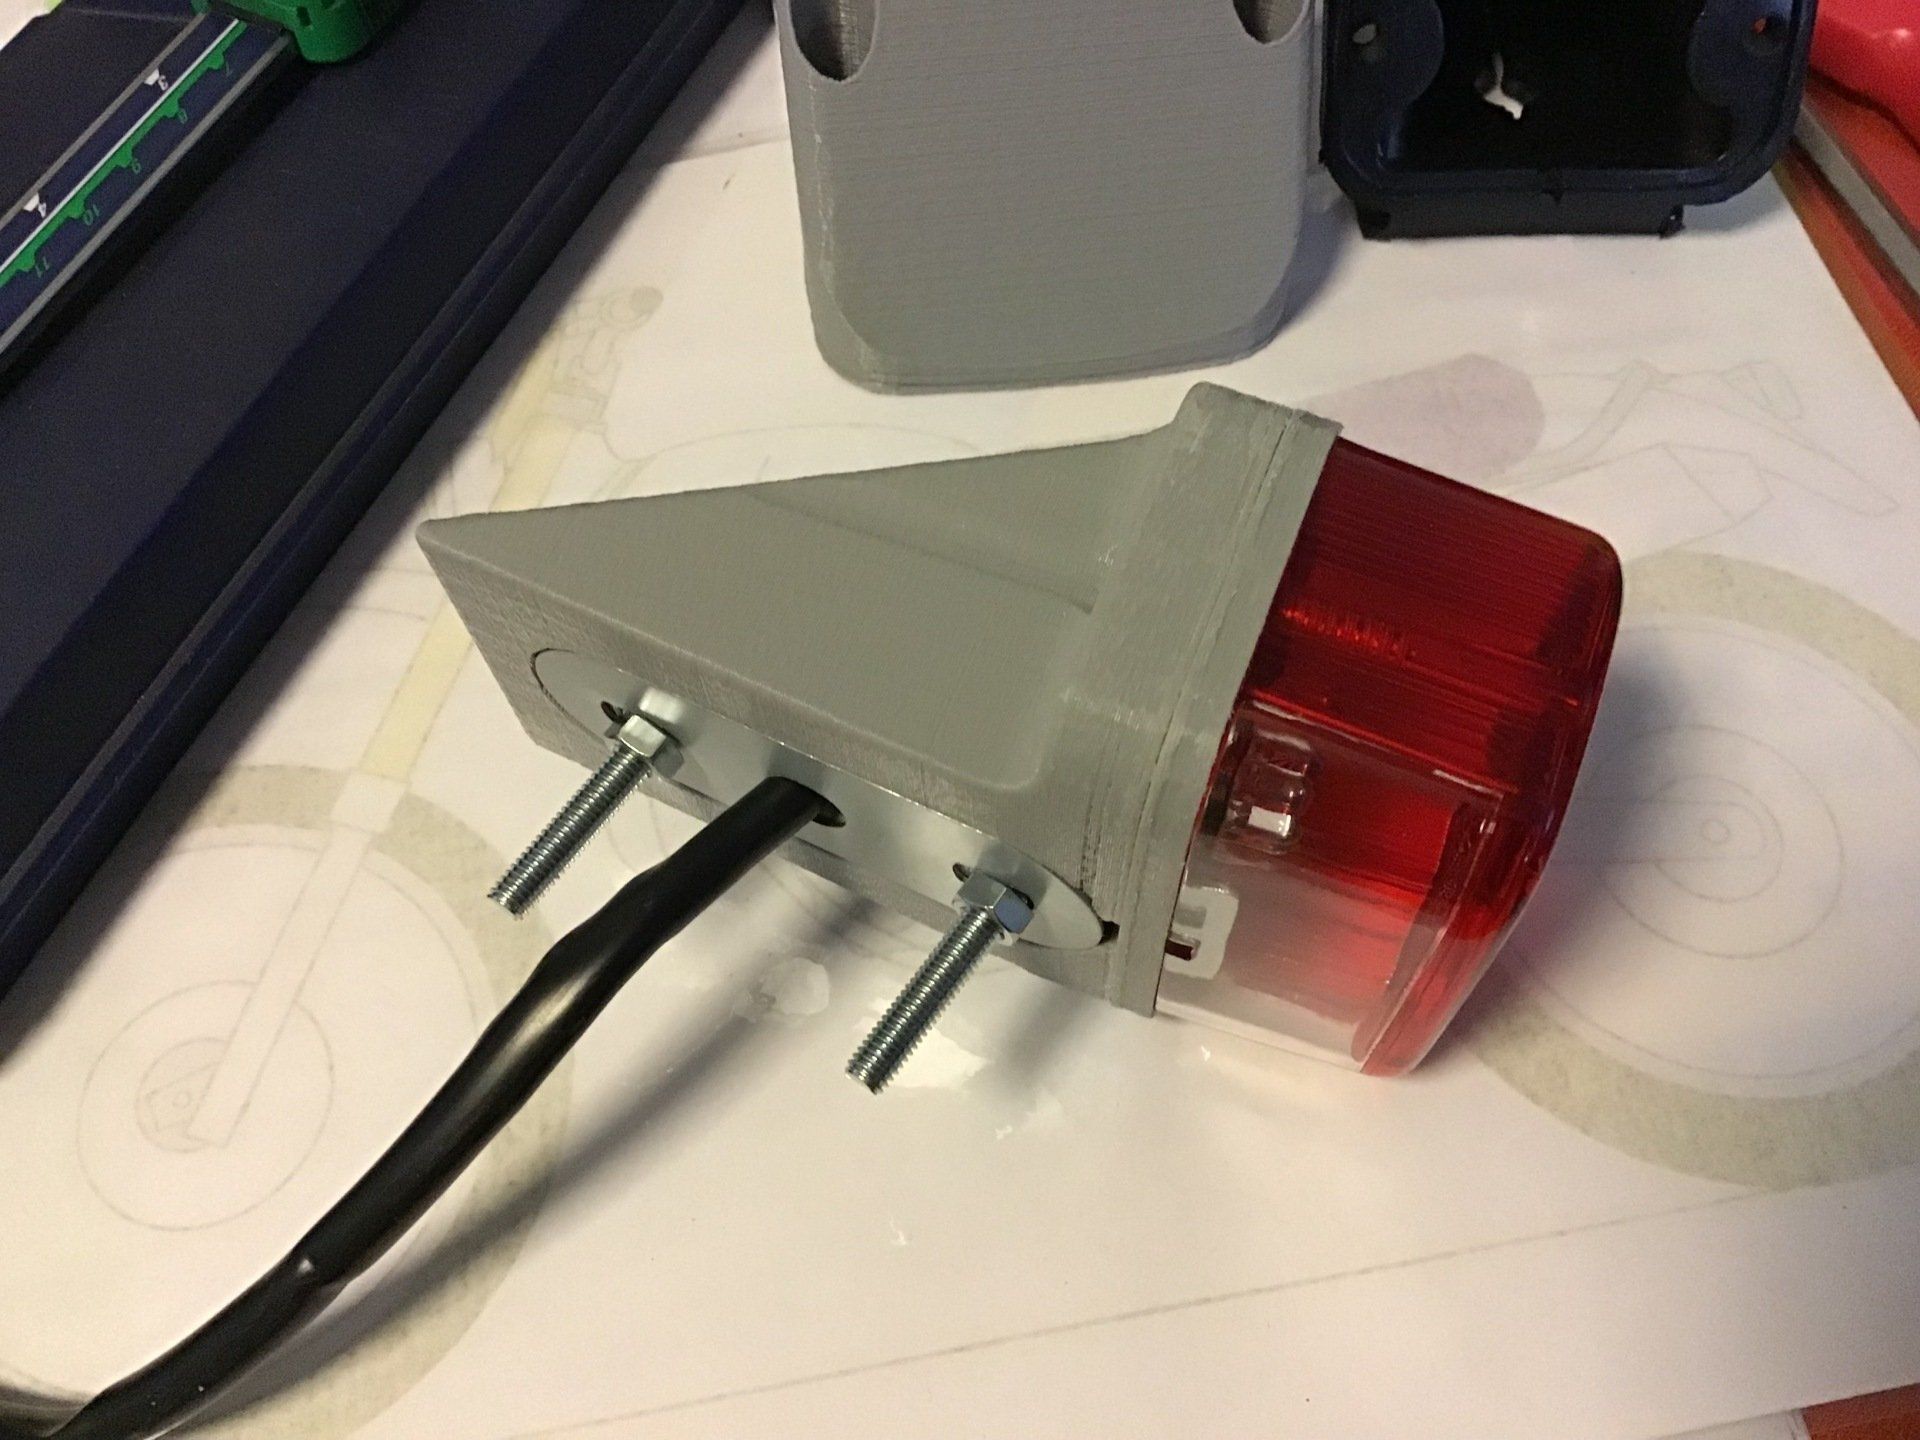 Bottom view of 3D printed rear light